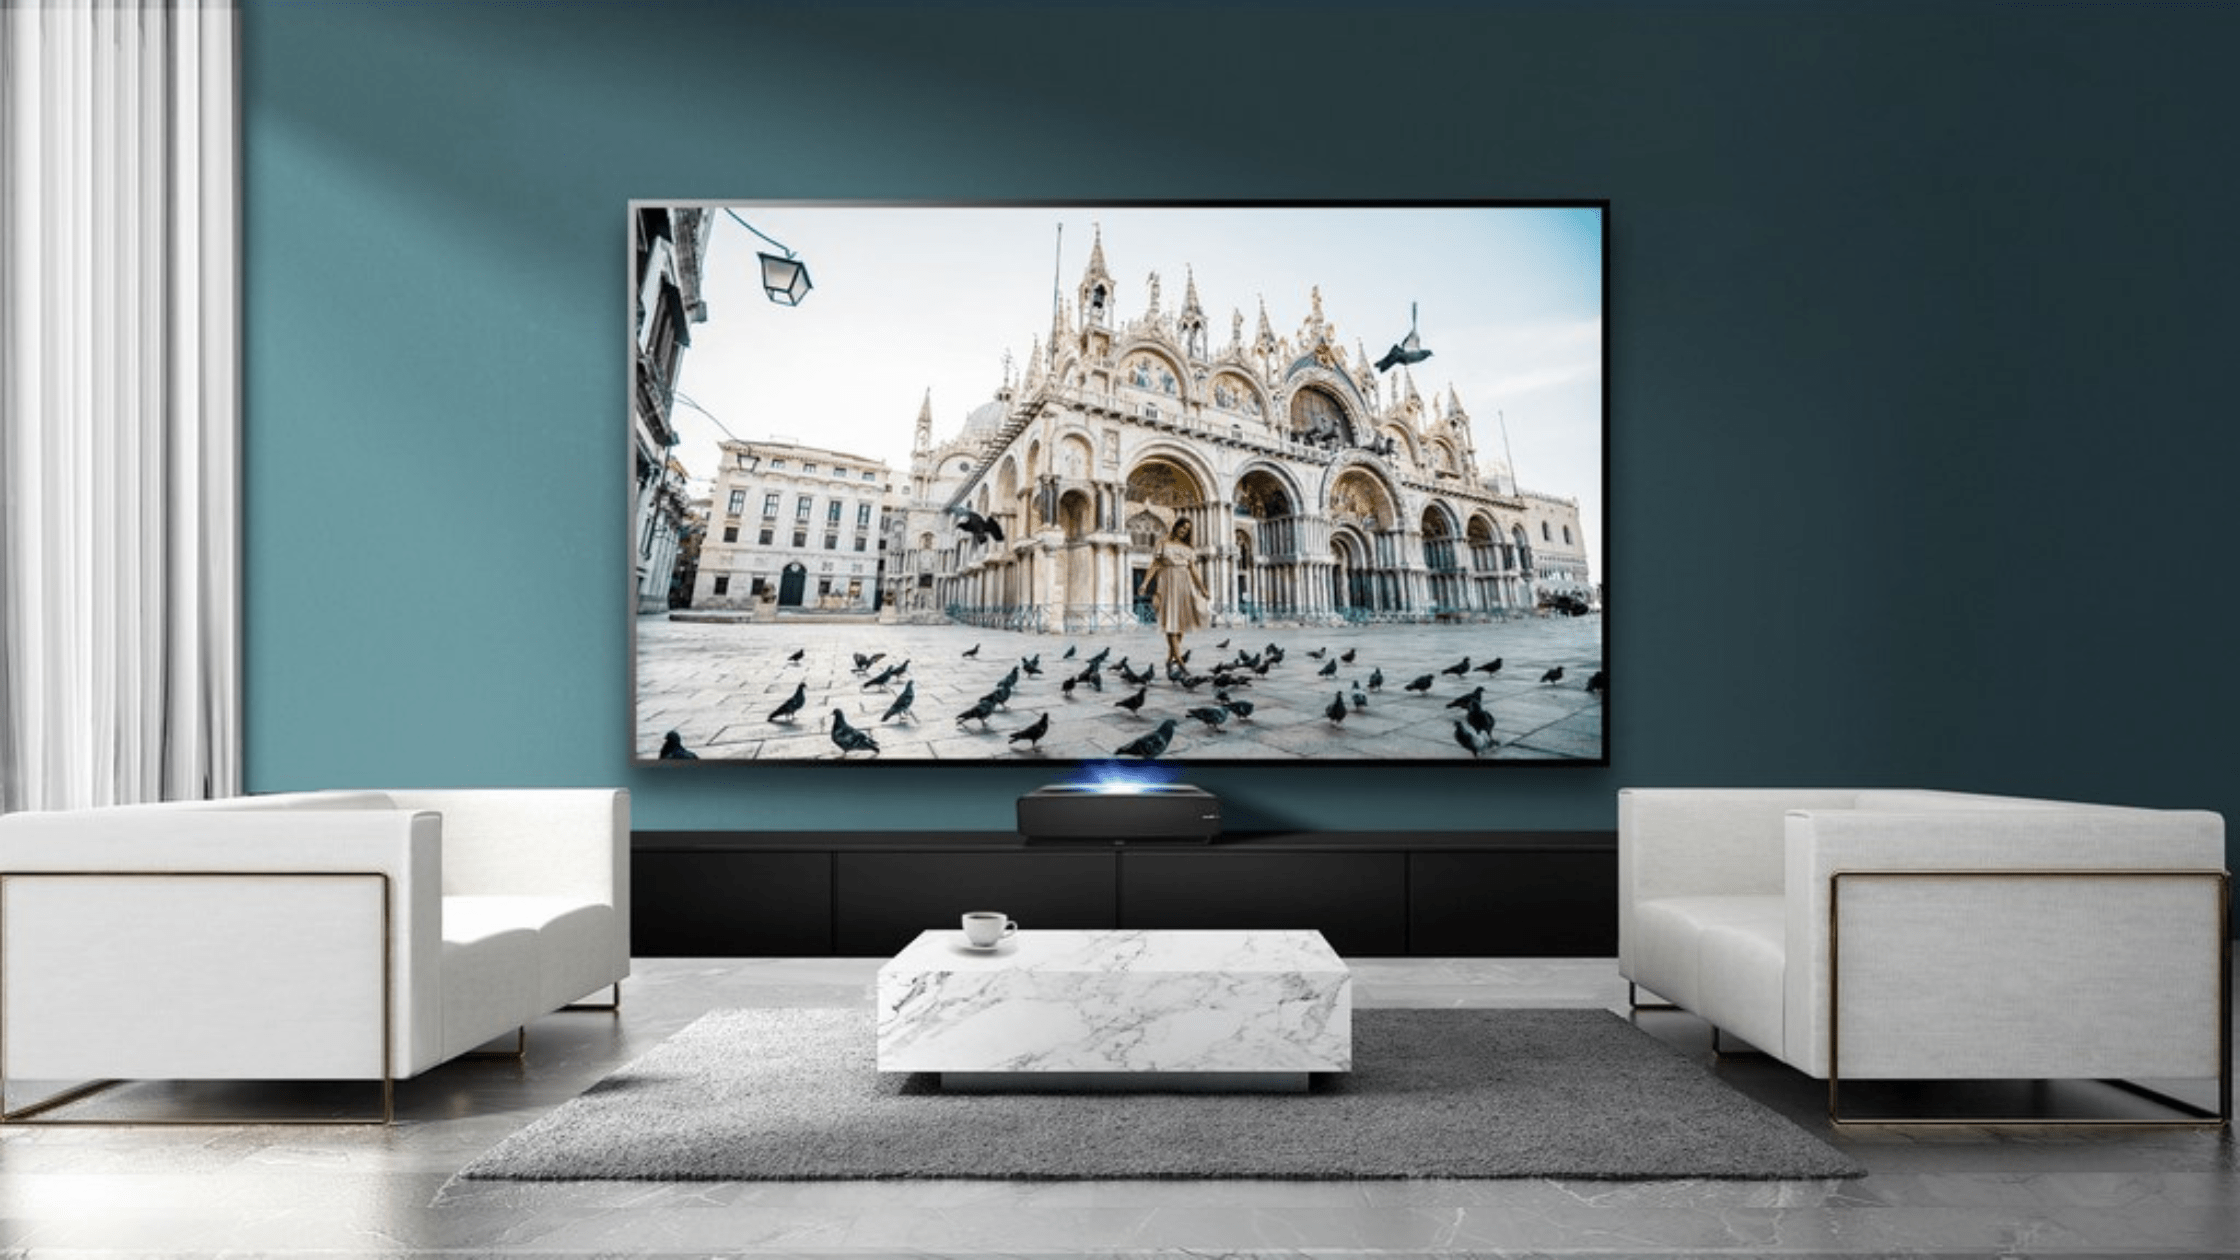 Hisense-L5G-projector-in-living-room